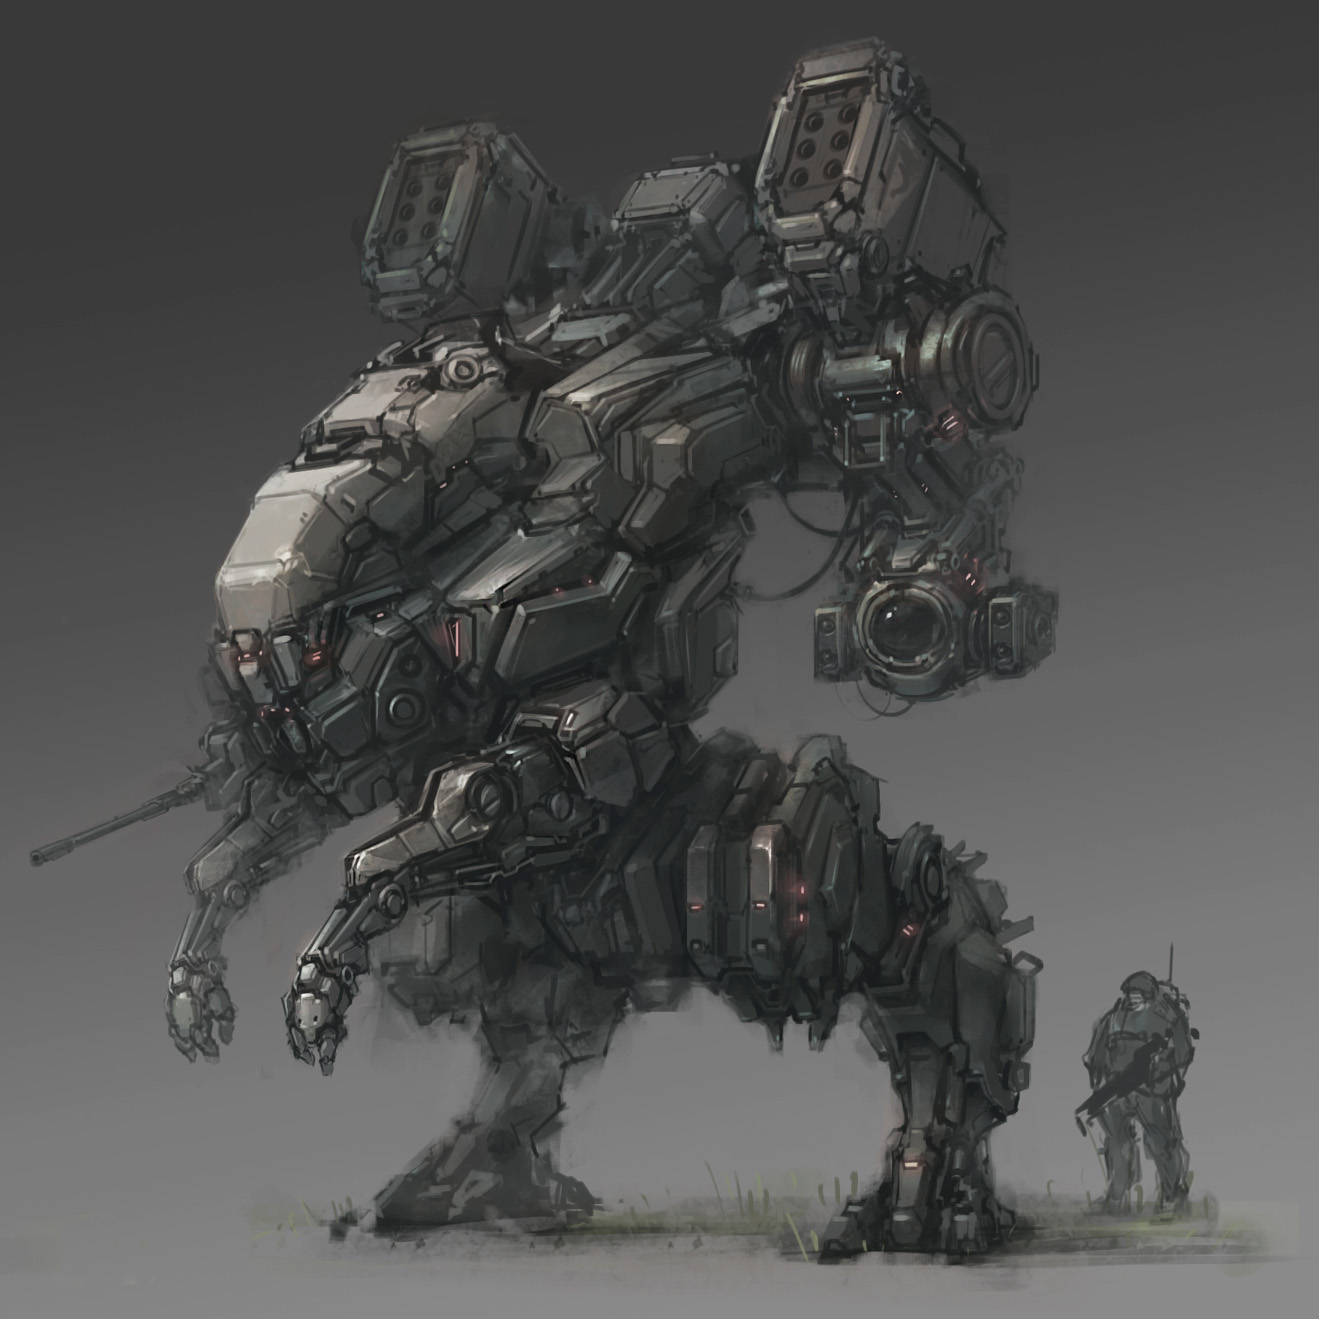 Just another mech